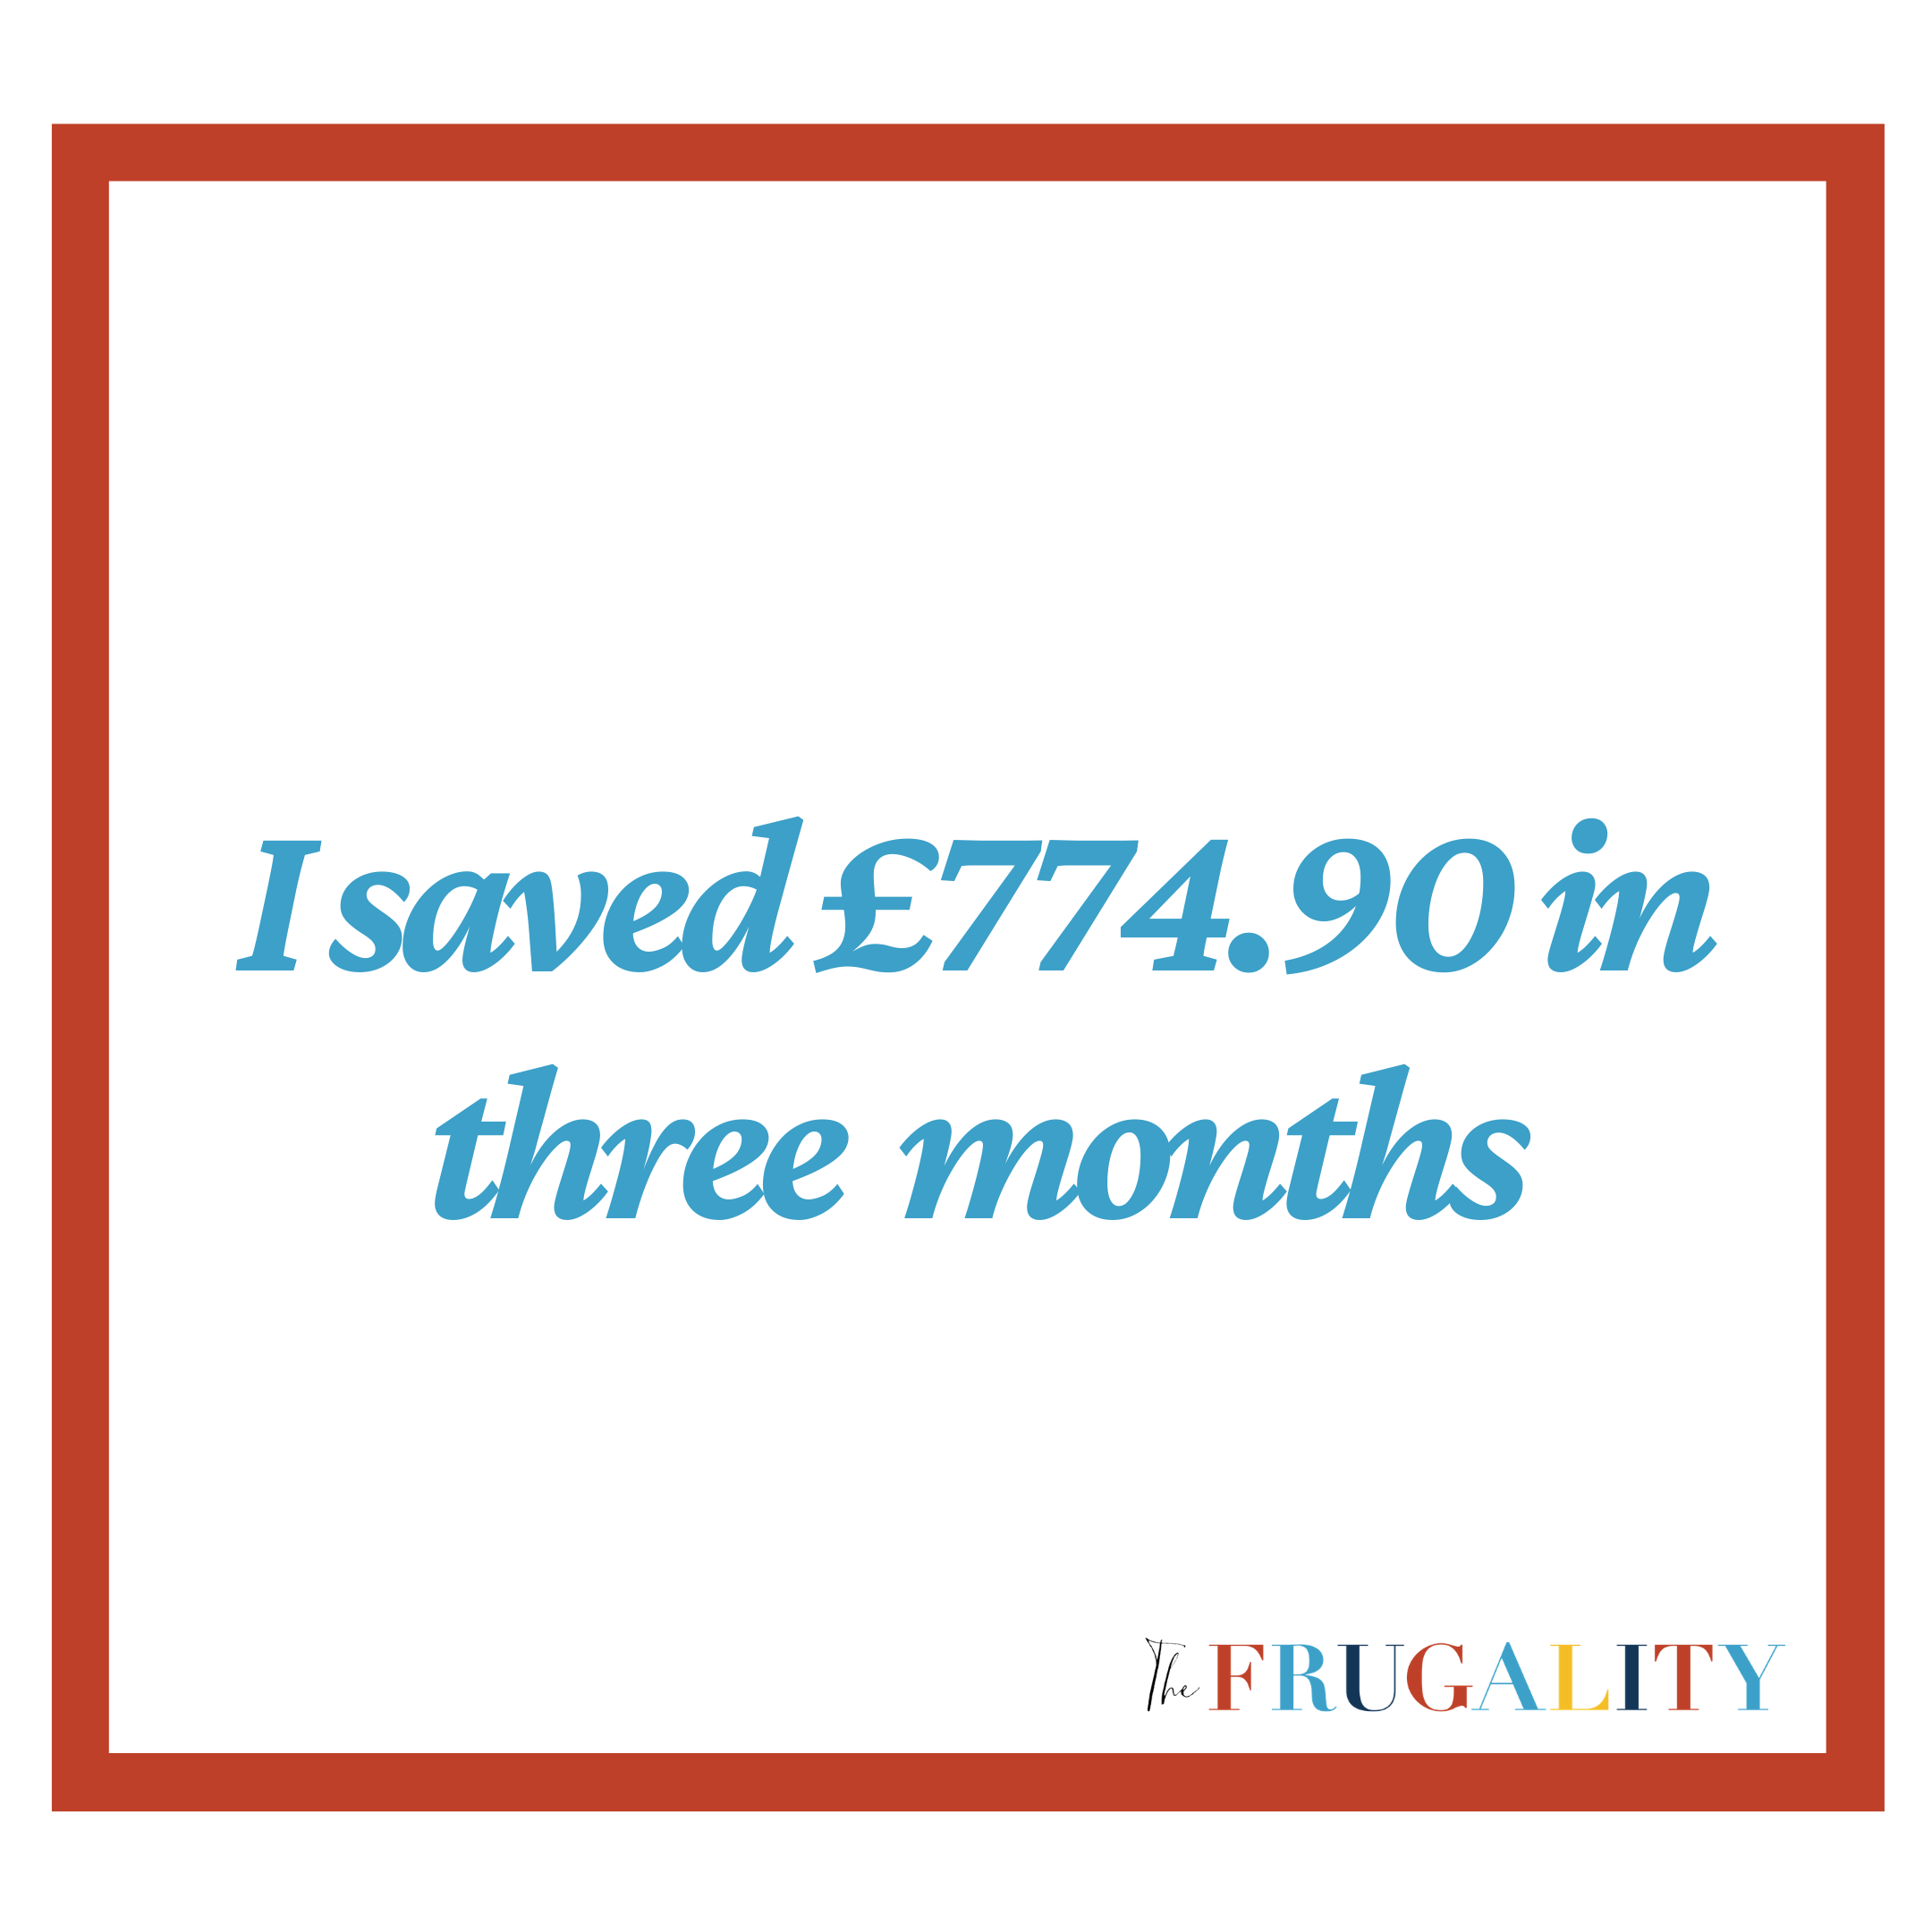 I SAVED £774.90 IN THREE MONTHS